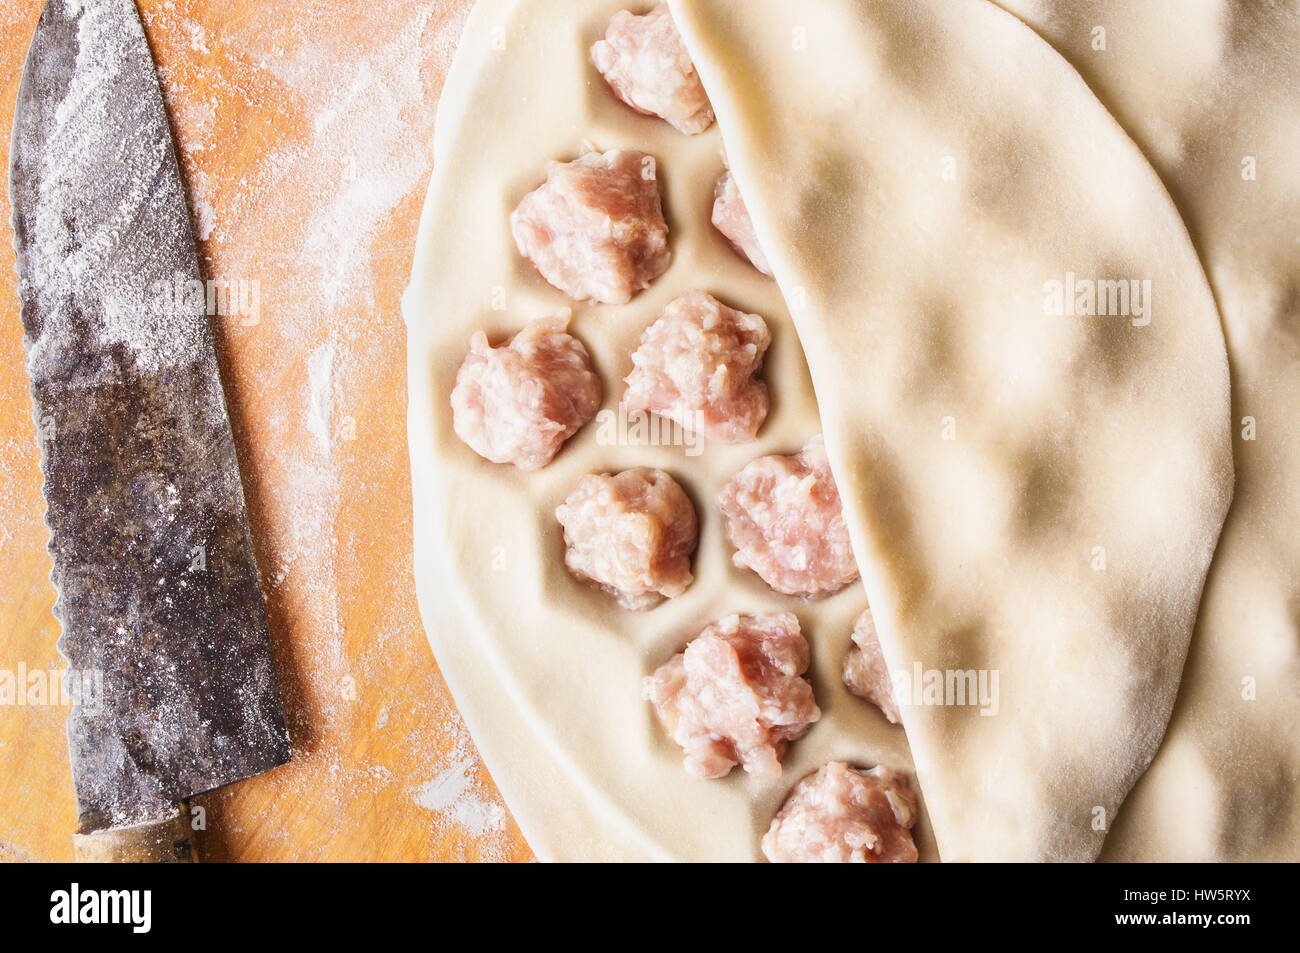 Step by step process of making home-made dumplings, ravioli or pelmeni with minced meat filling using ravioli mold or ravioli maker. Stock Photo